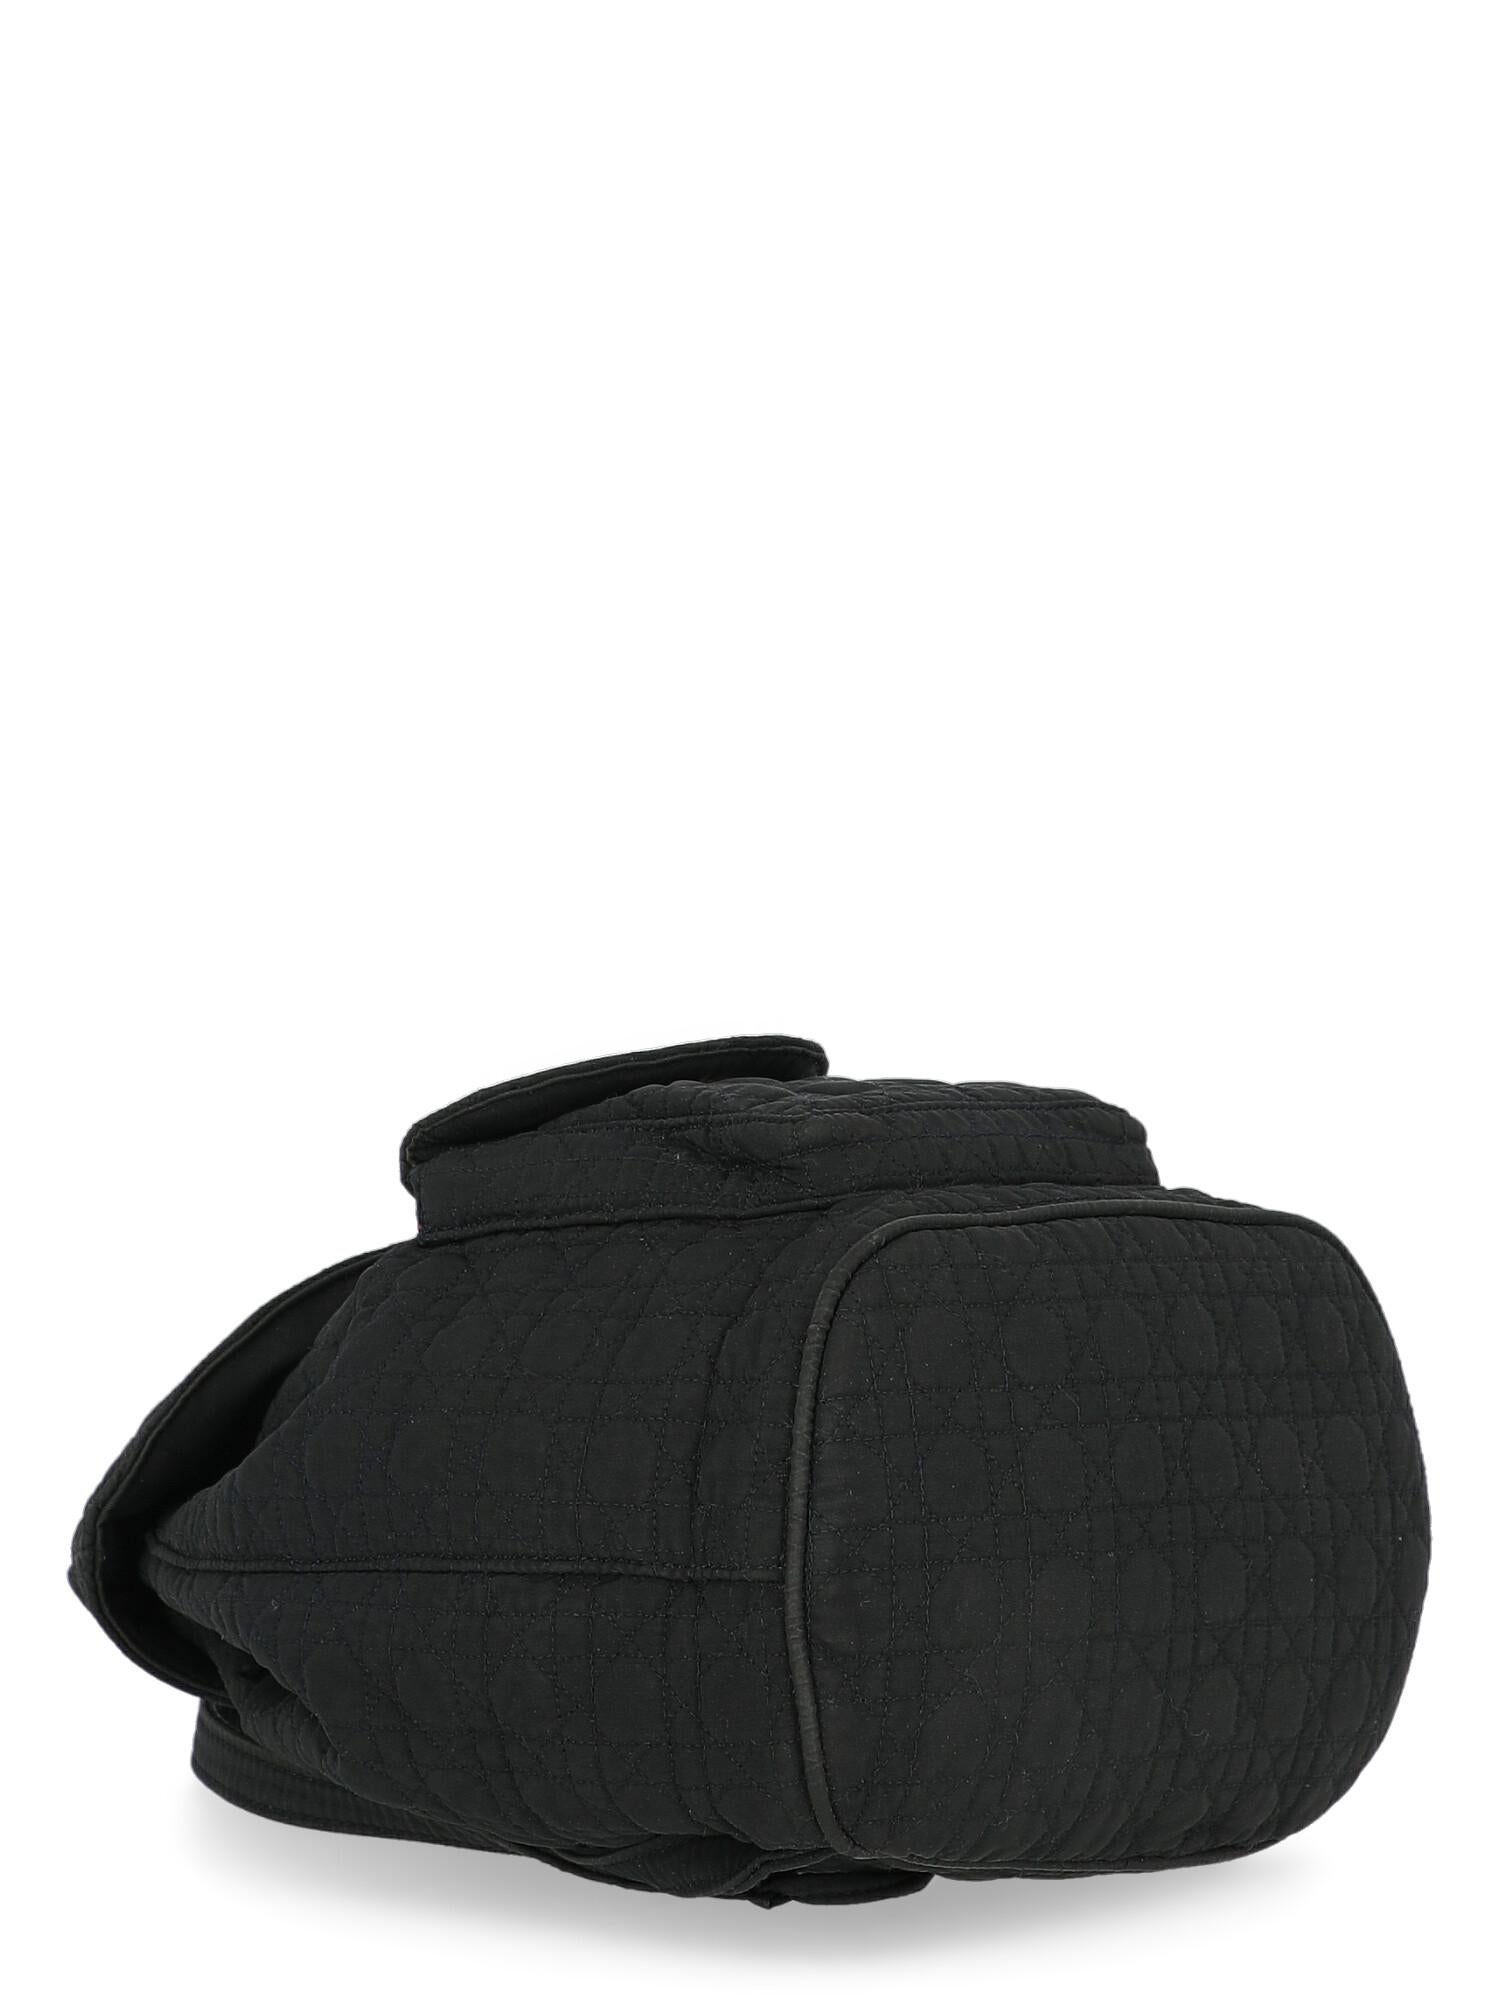 Dior Woman Backpacks Black Fabric For Sale 1